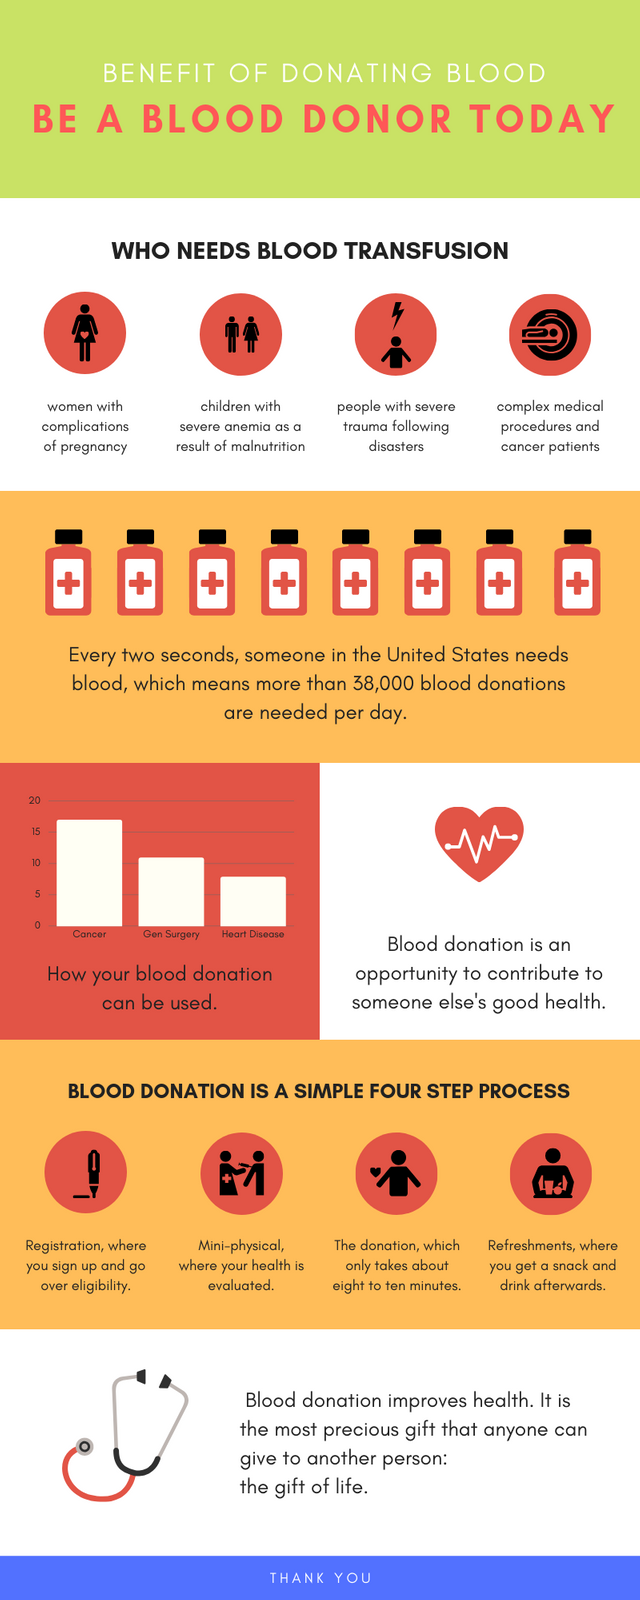 Benefit of donating blood BE A BLOOD DONOR TODAY.png